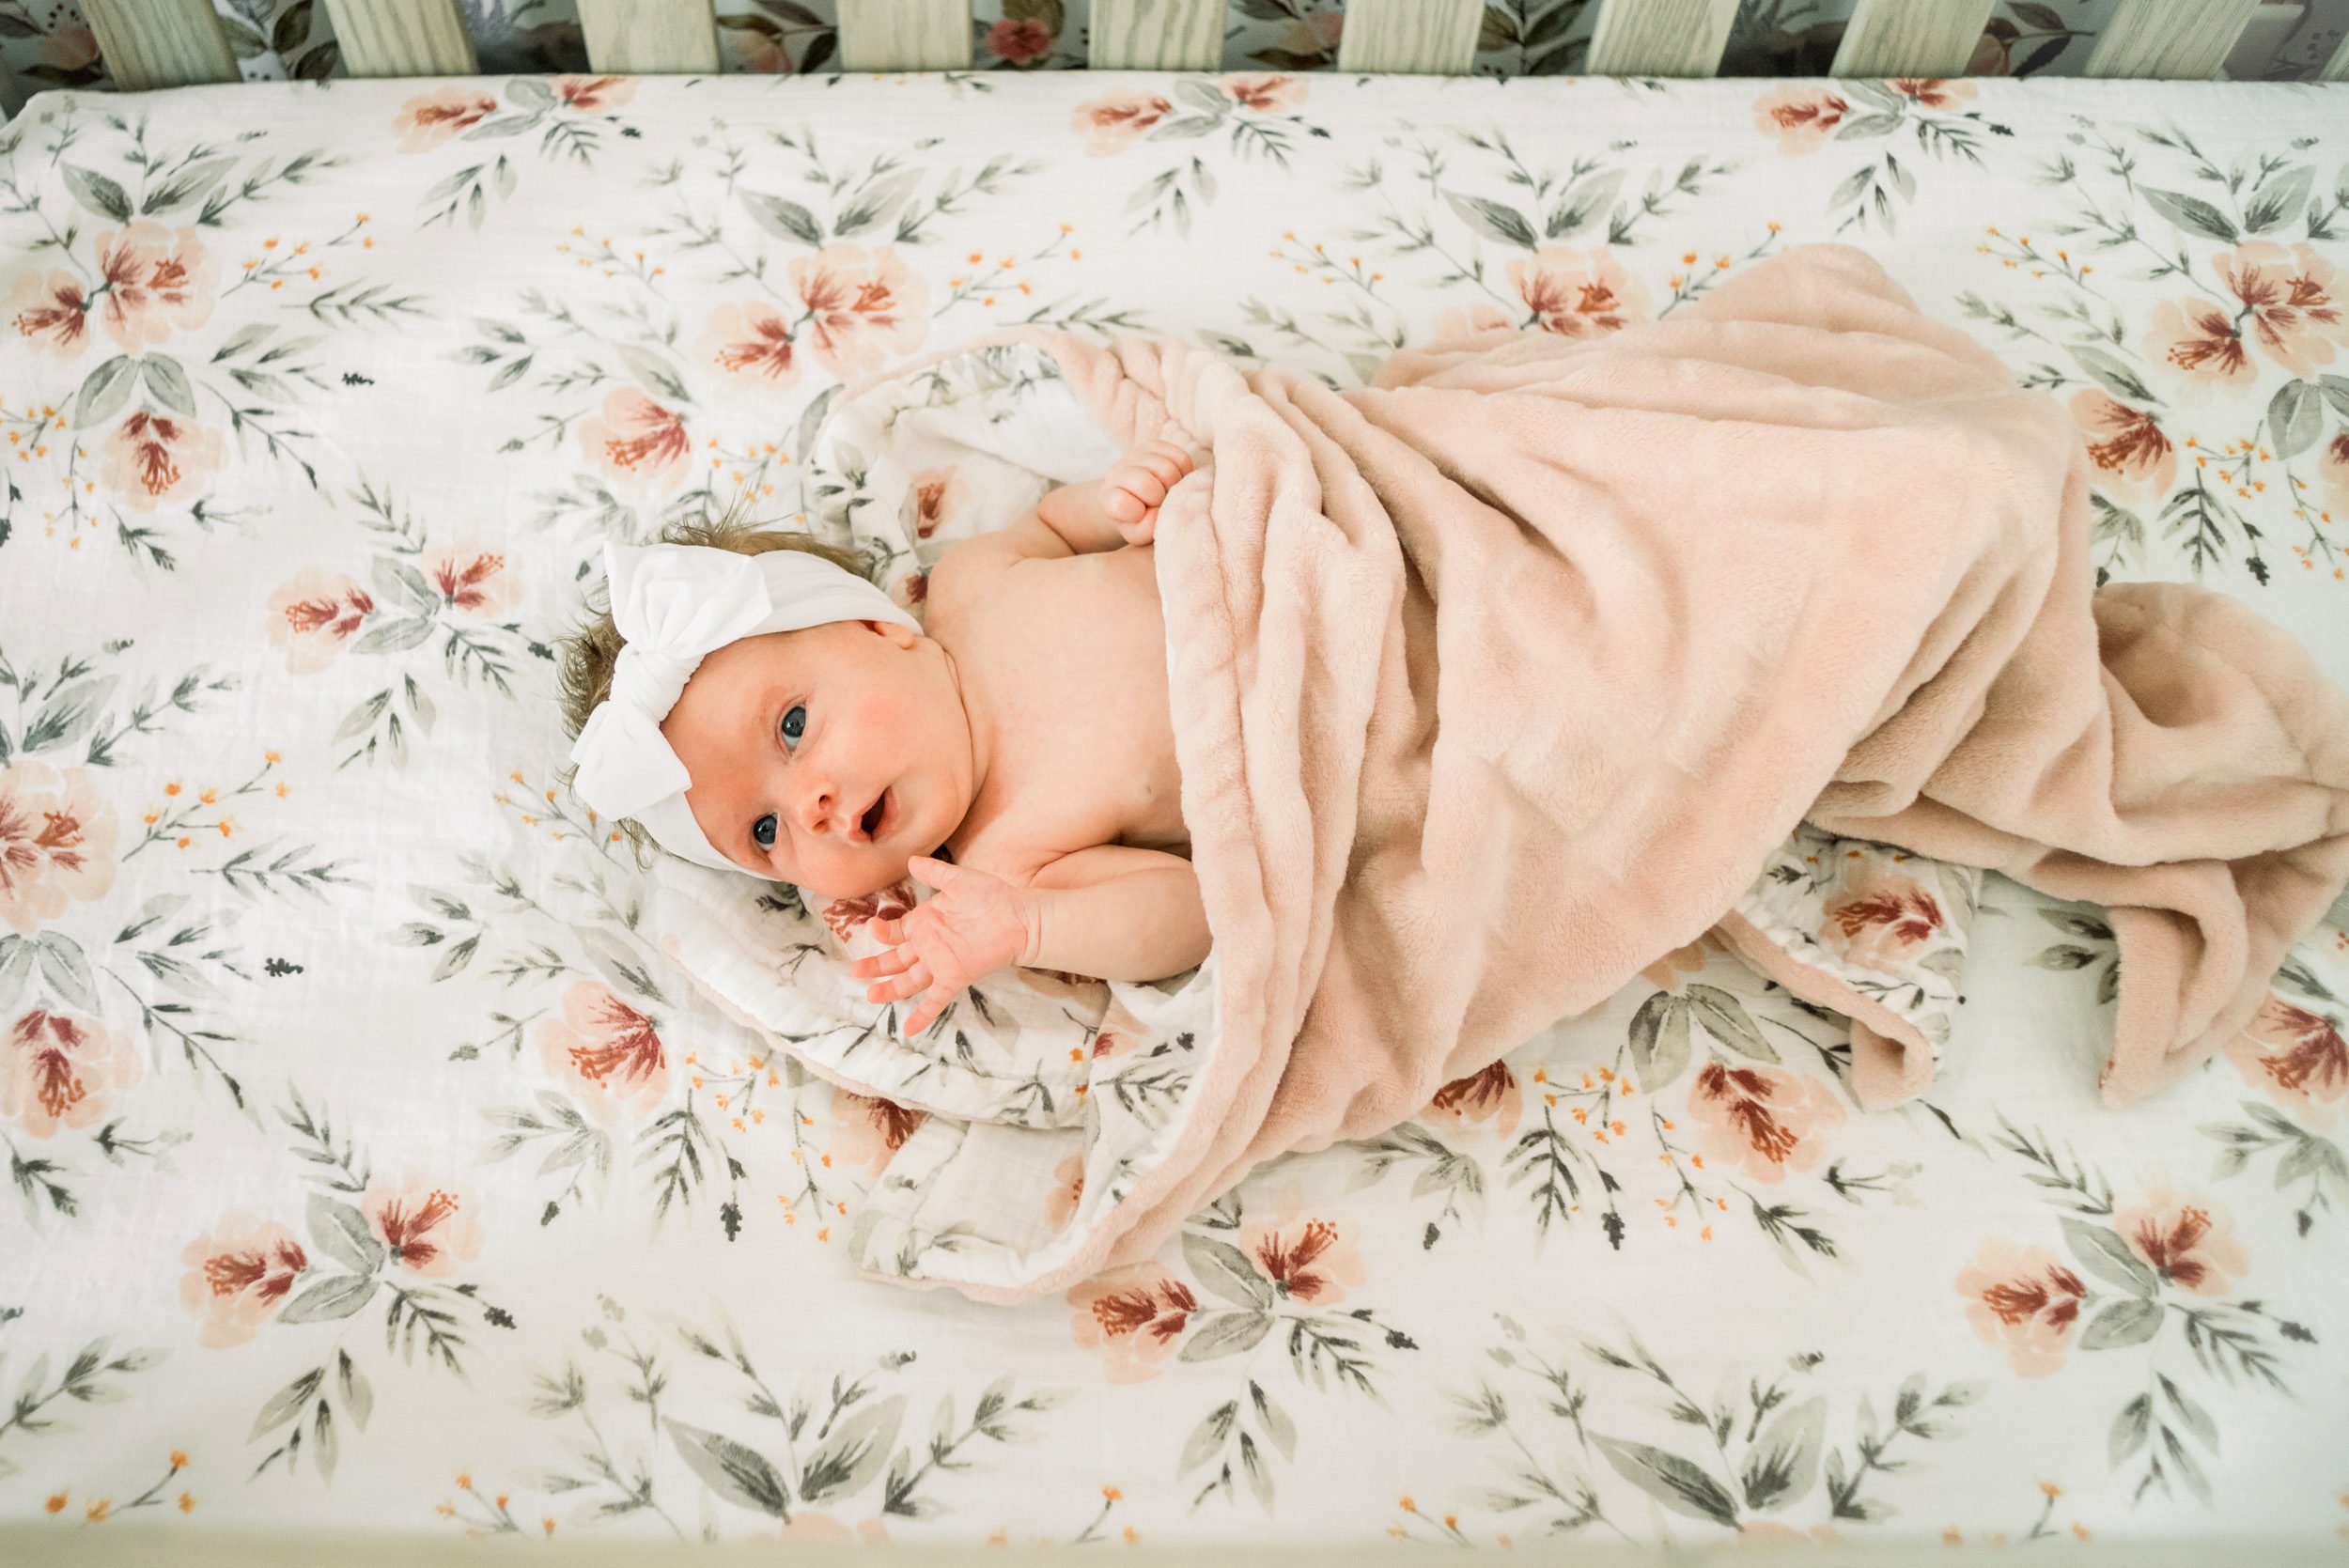 a baby girl wearing a white headband laying in her crib on a floral crib sheet with a fuzzy pink blanket over her gazing up and holding her hand out toward the camera during a newborn photo session